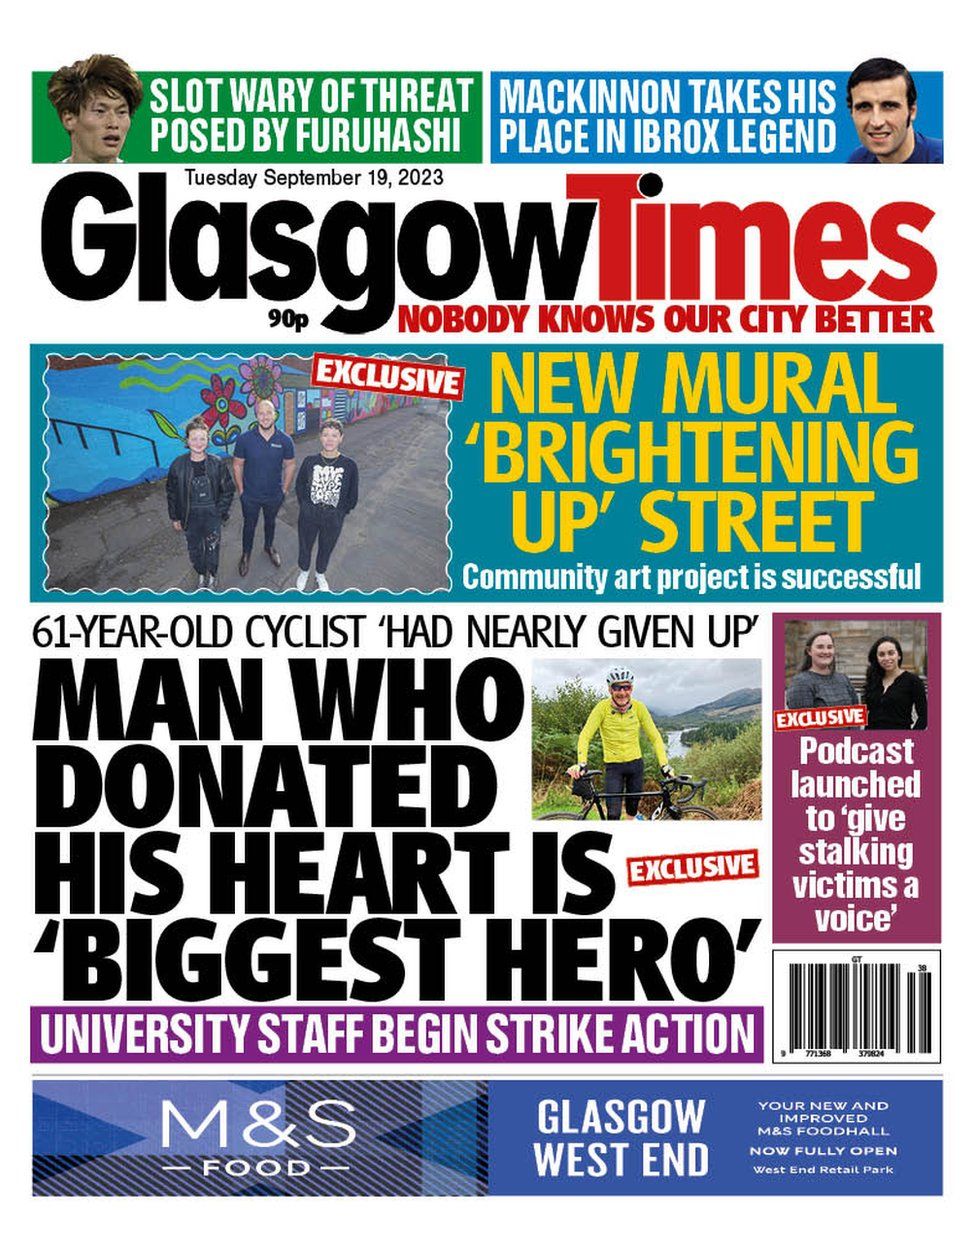 The Glasgow Times